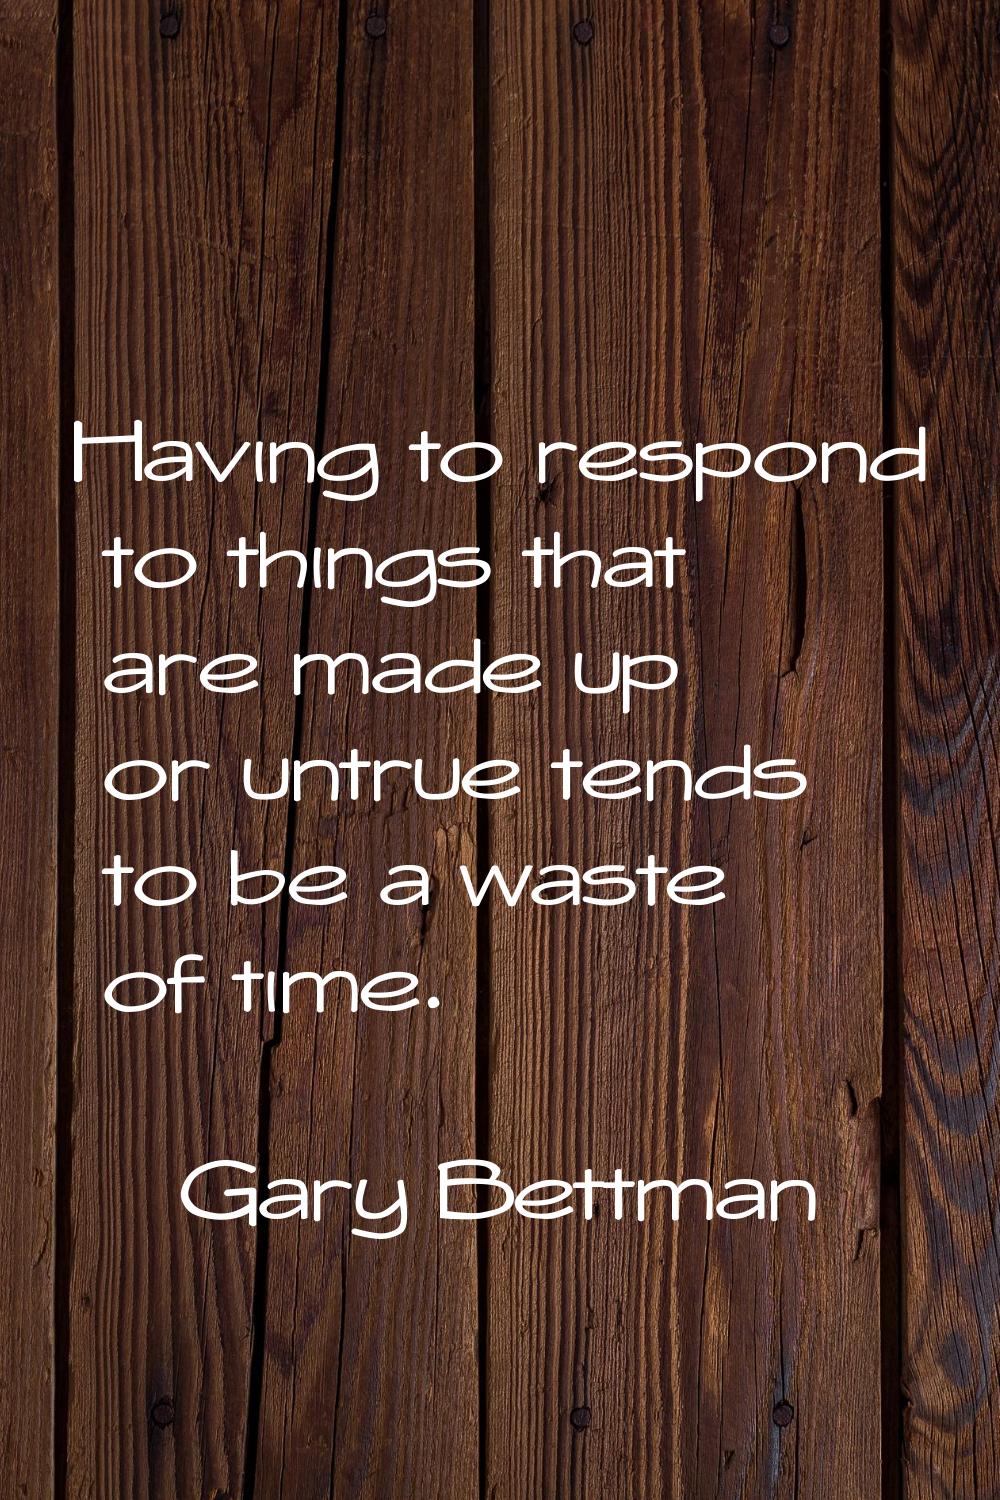 Having to respond to things that are made up or untrue tends to be a waste of time.